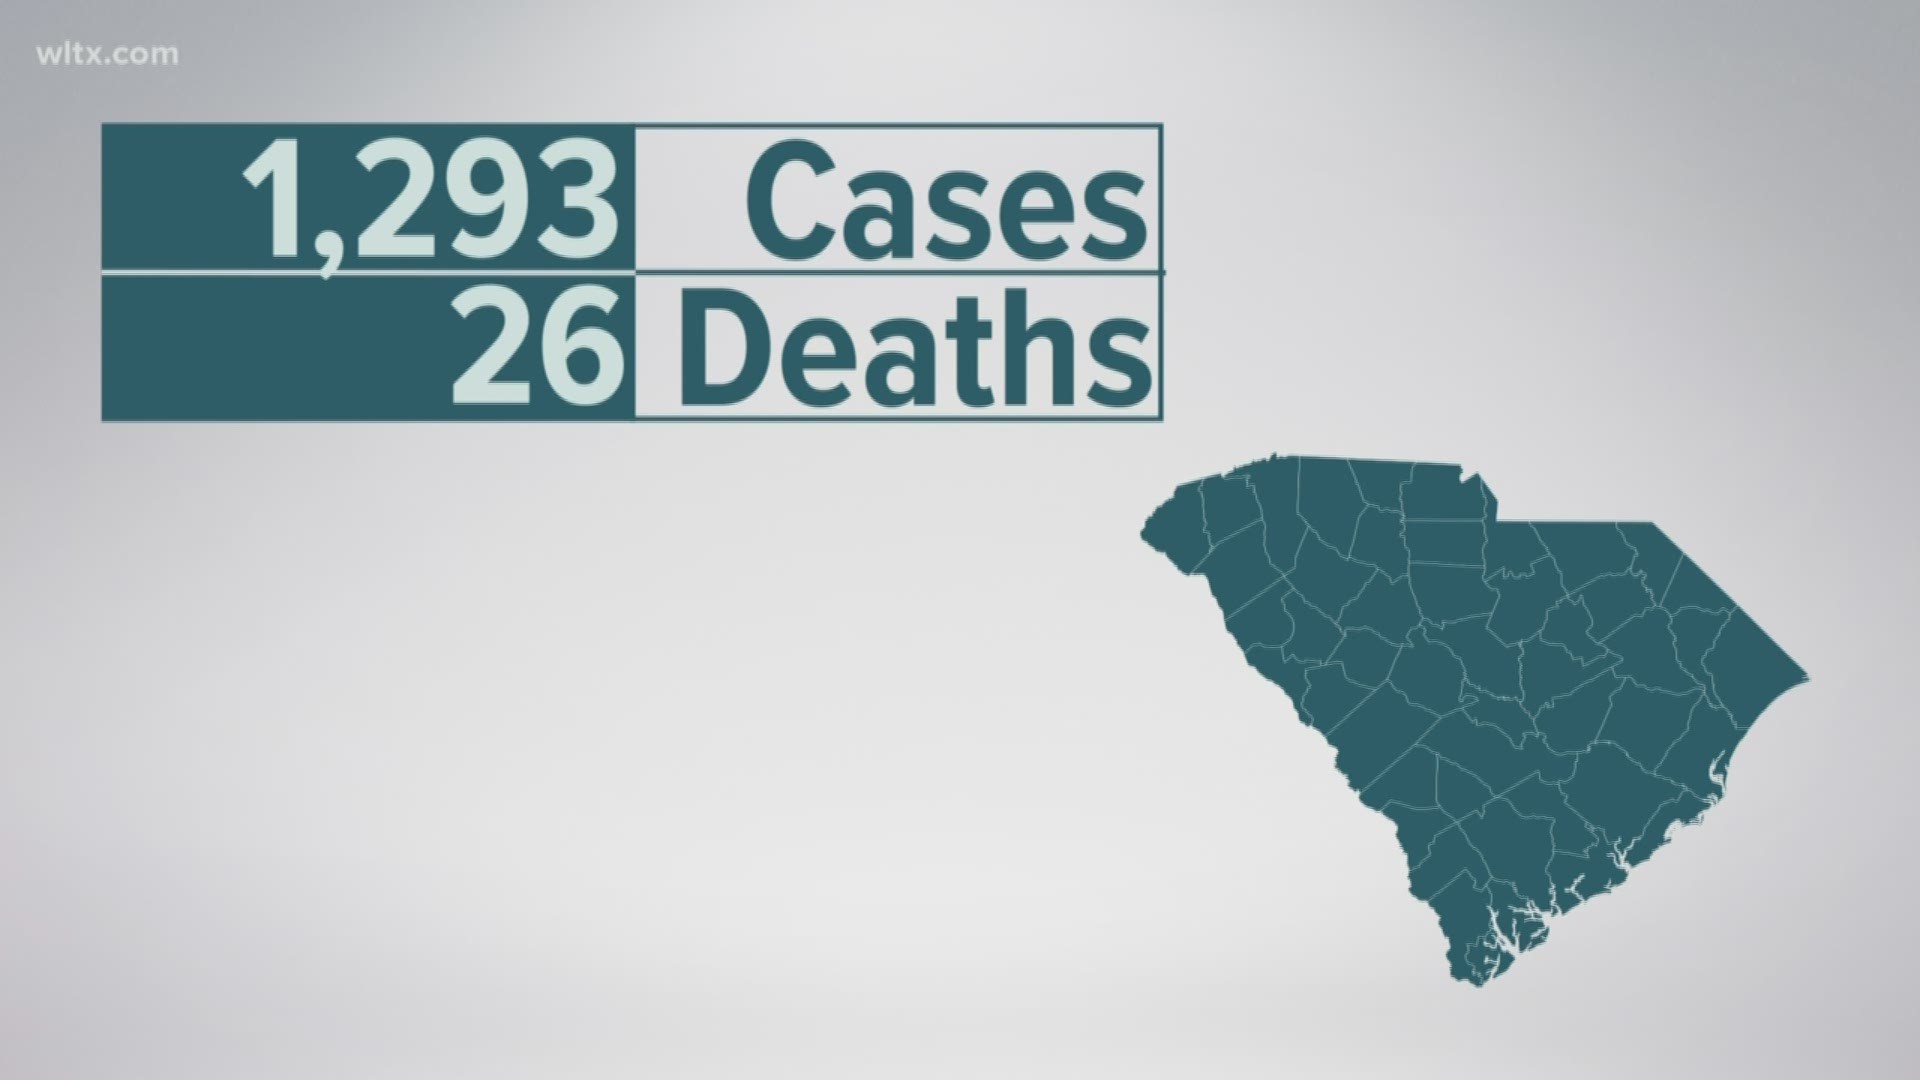 The latest numbers were released Wednesday afternoon. This brings the state’s total number of deaths to 26.